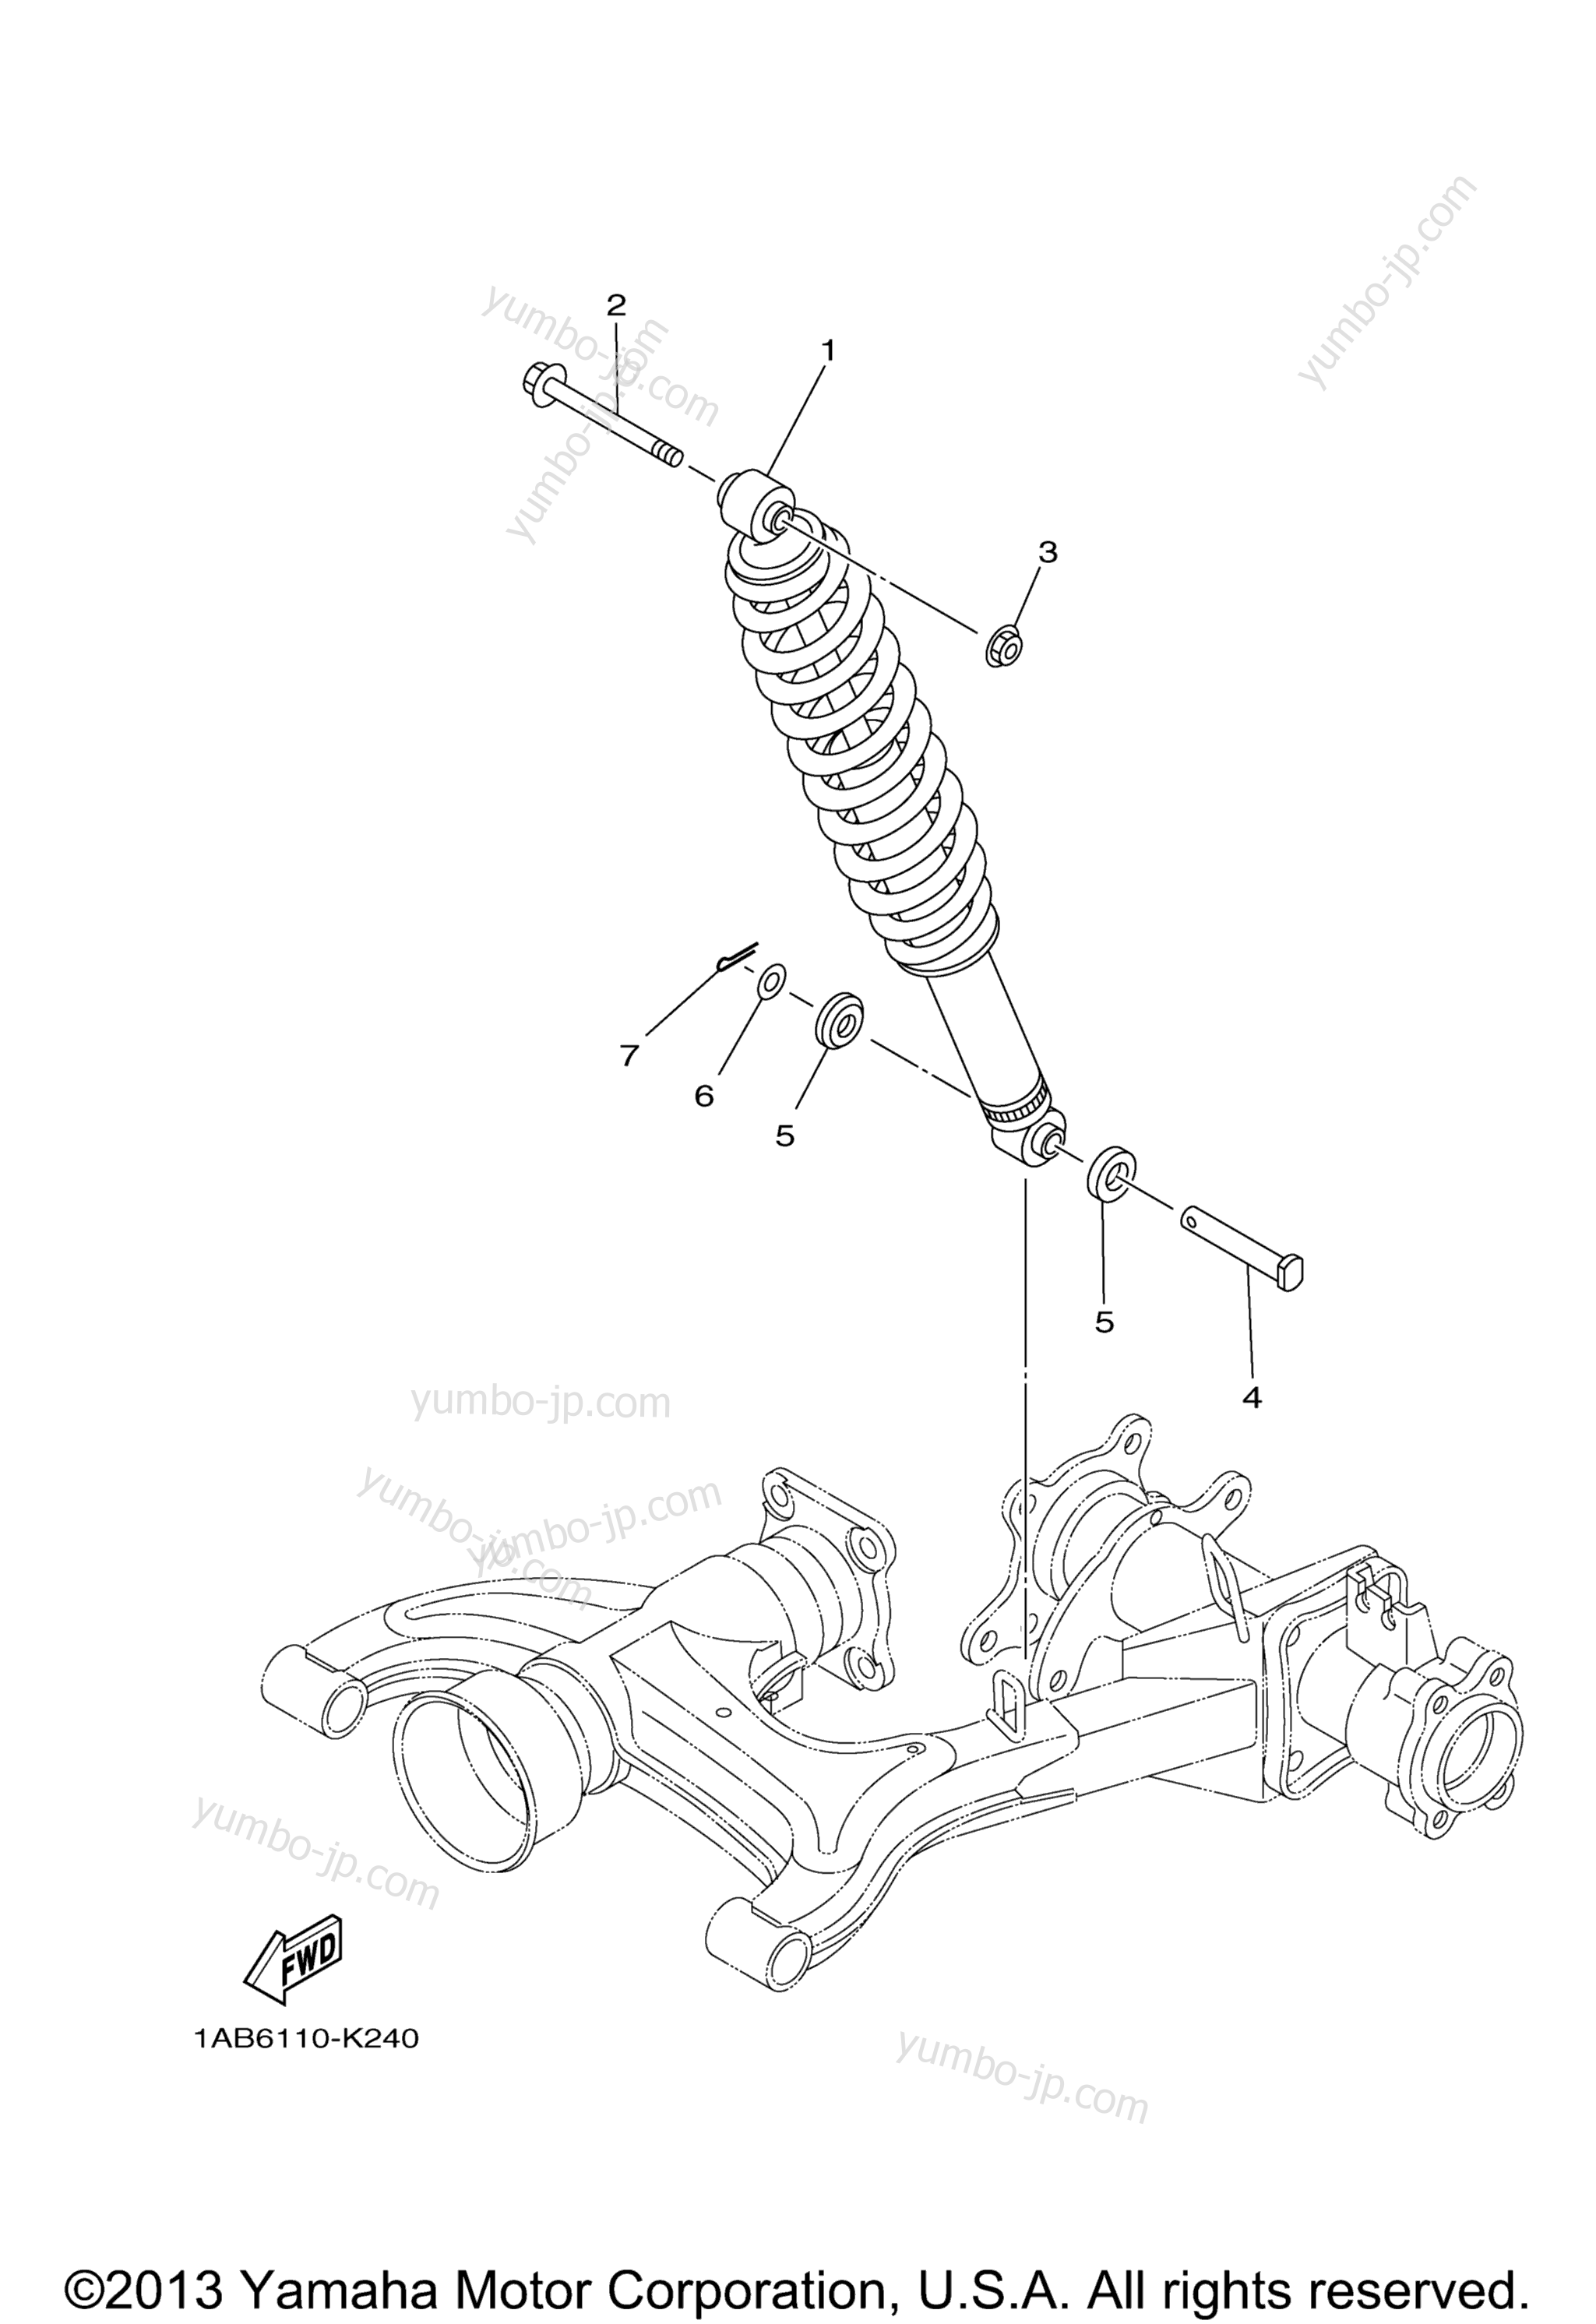 Rear Suspension for ATVs YAMAHA GRIZZLY 350 2WD (YFM35GAL) 2011 year